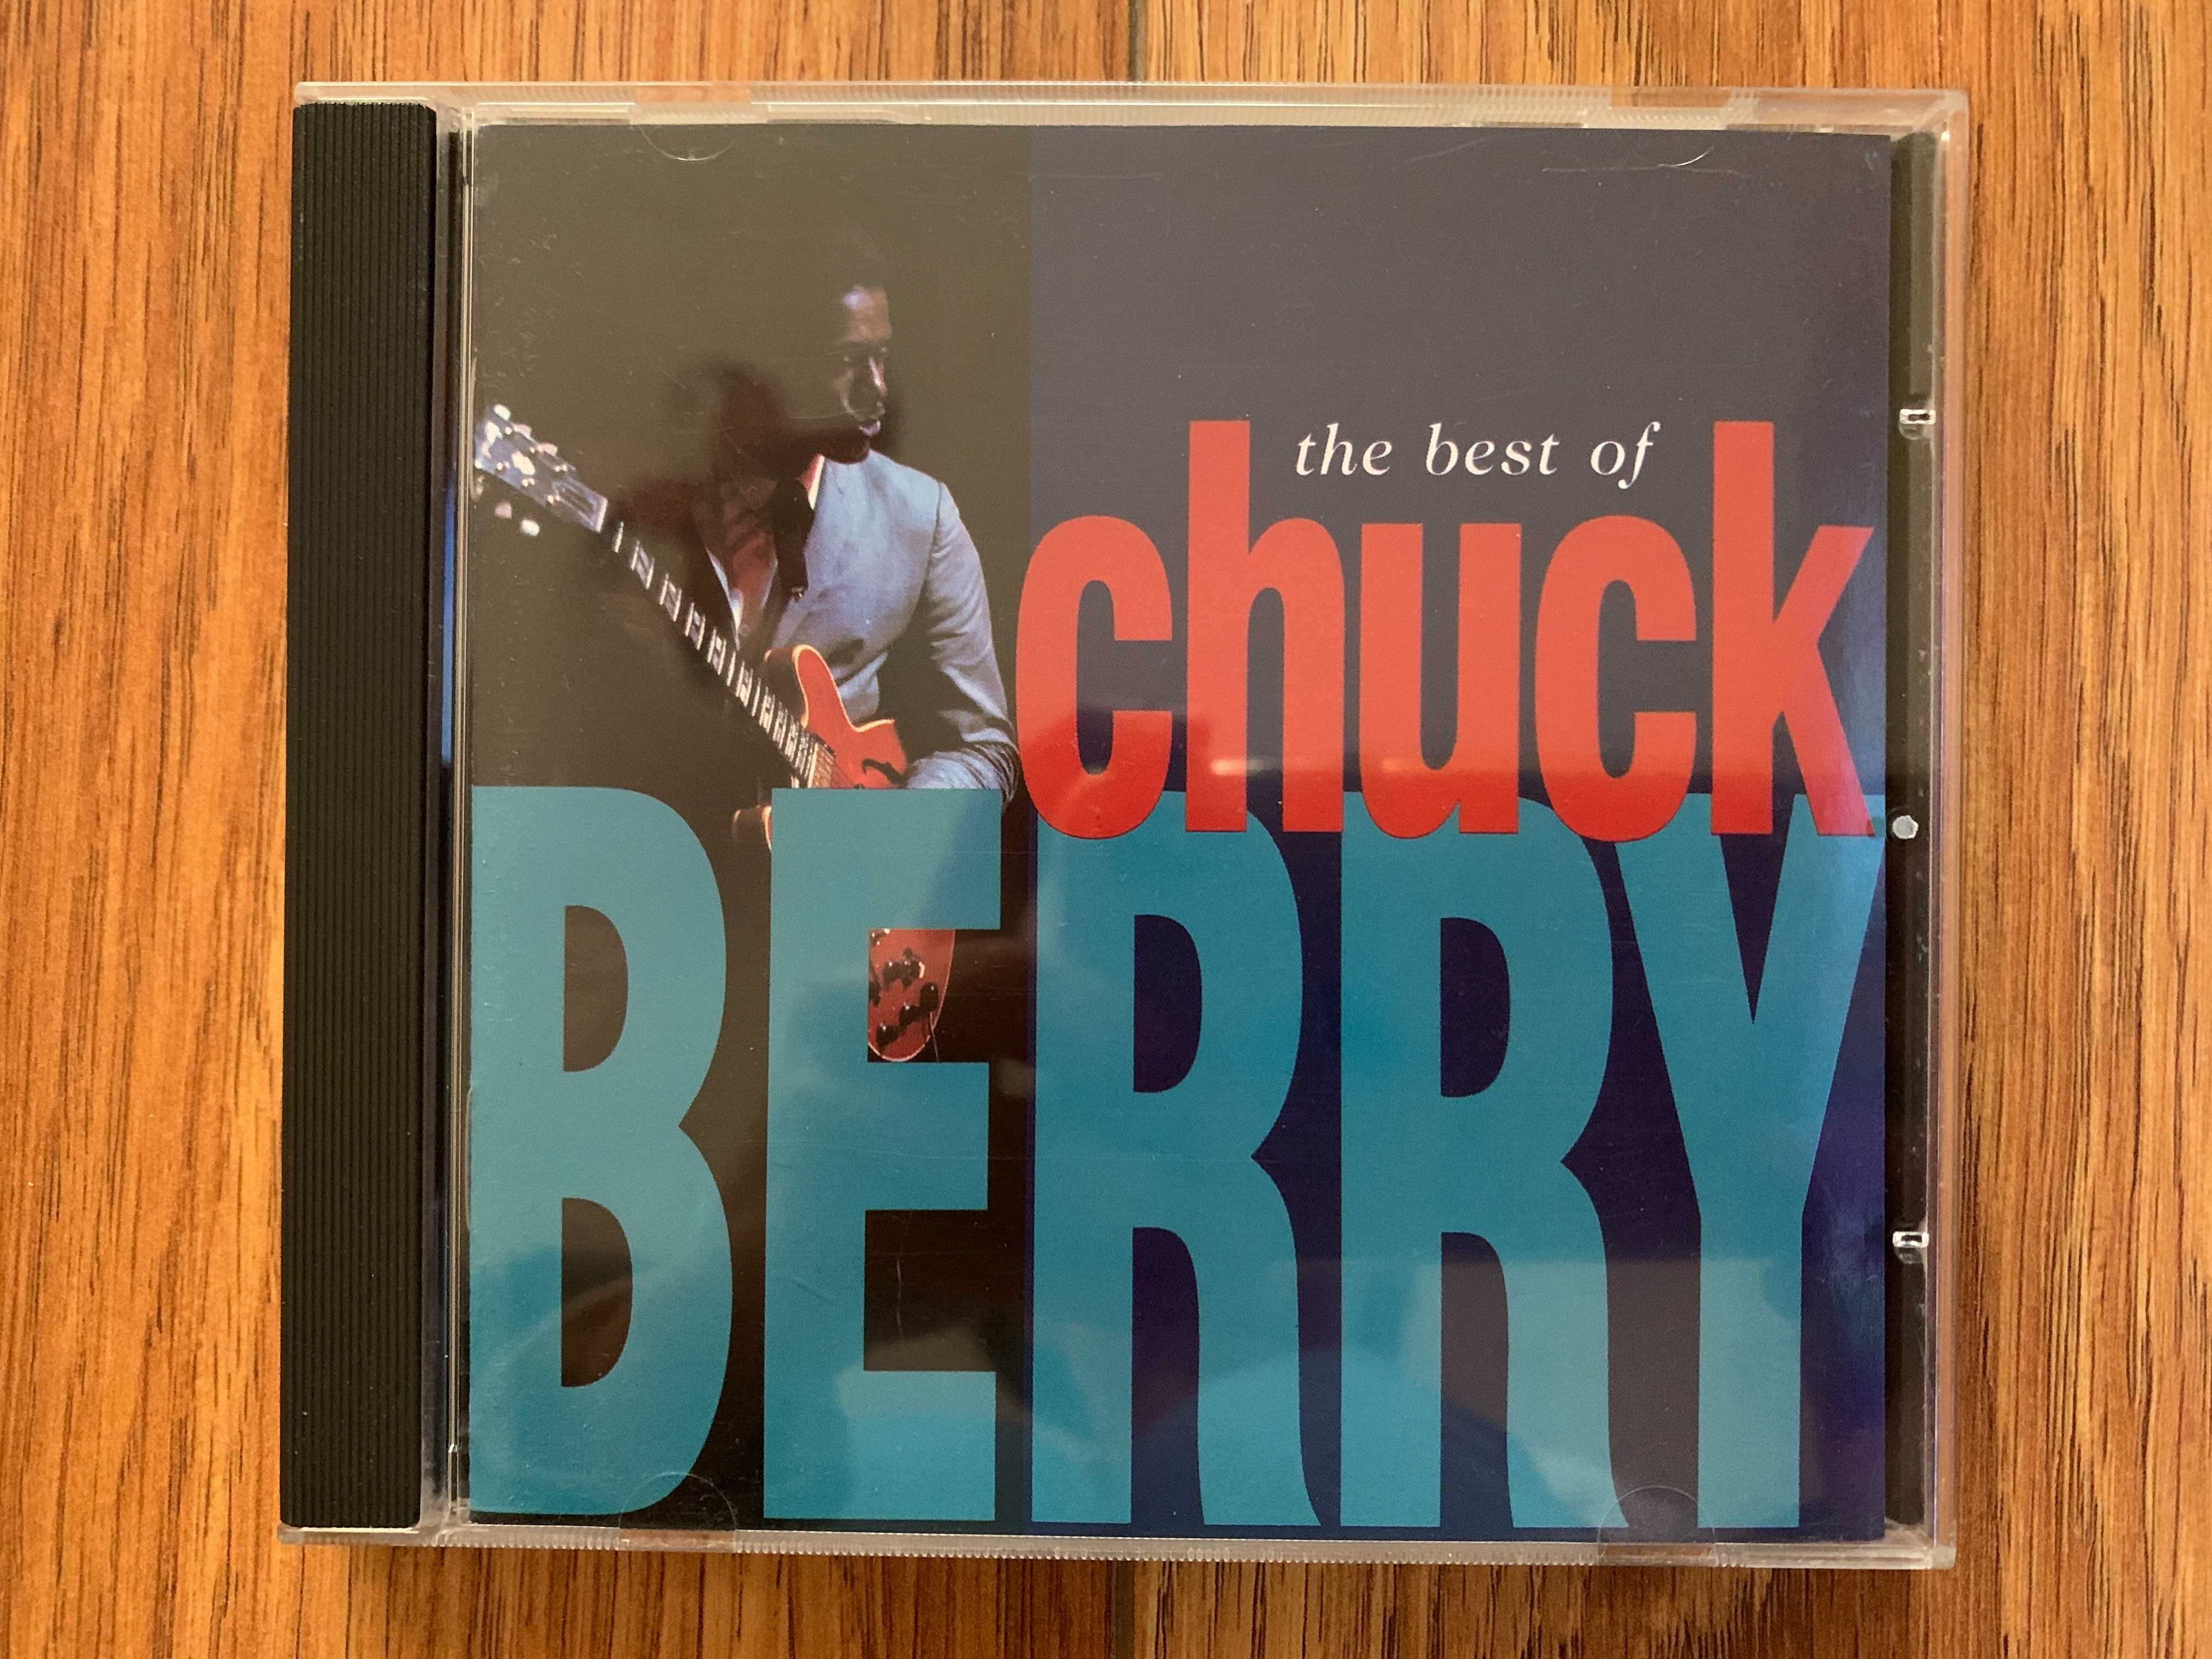 The Best of Chuck Berry - cd